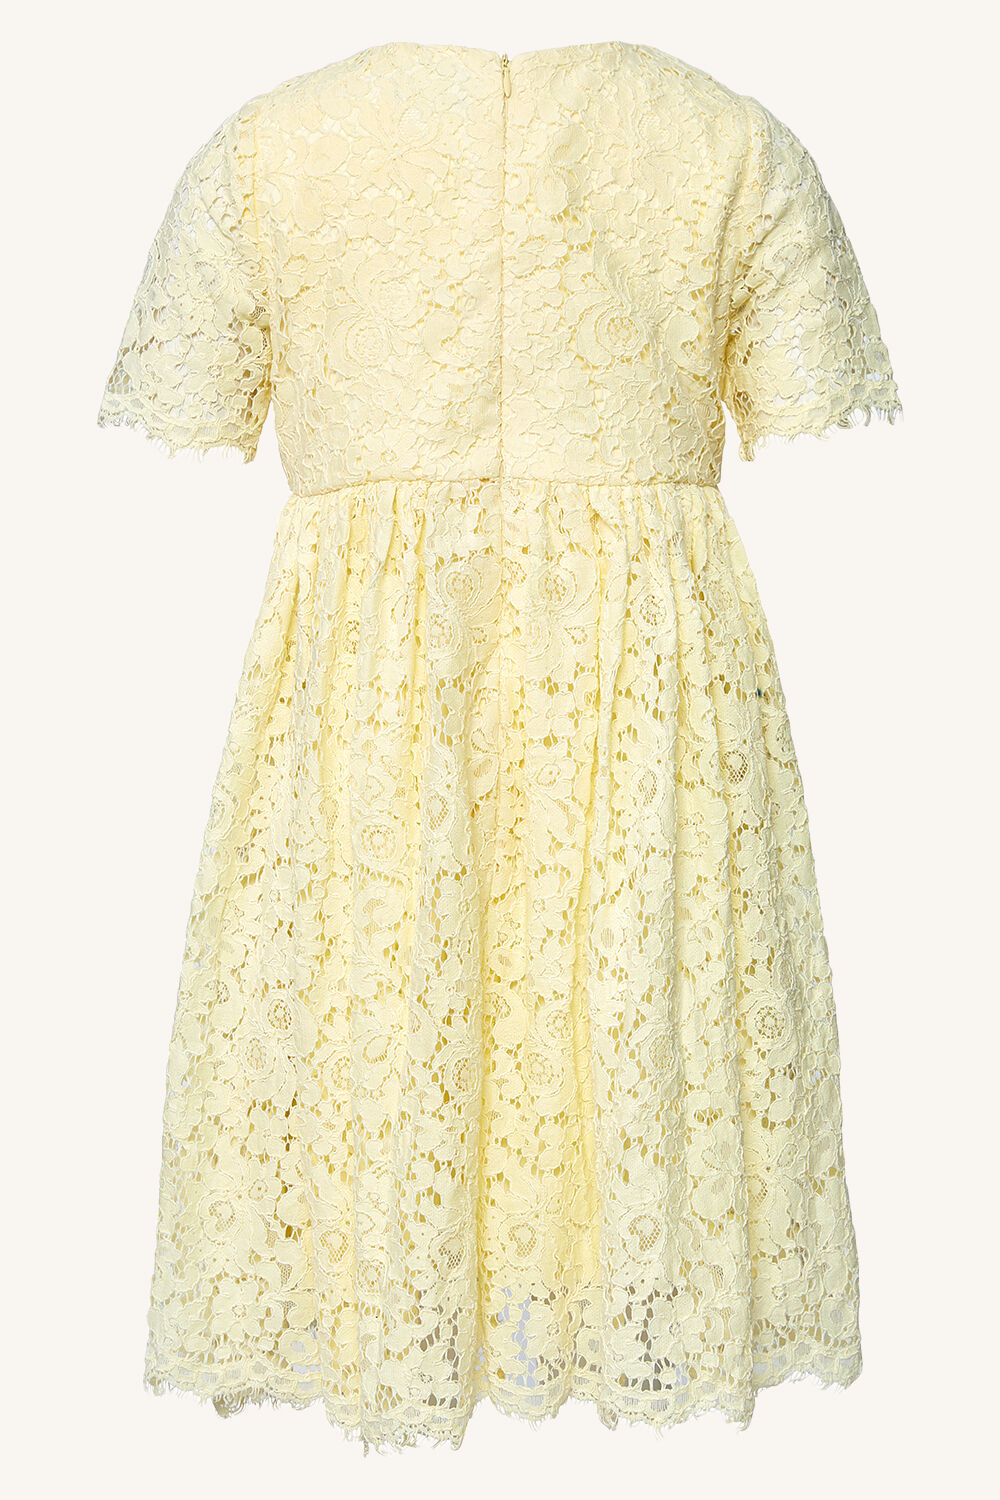 Girls BAILEE LACE DRESS in colour BUTTERCUP